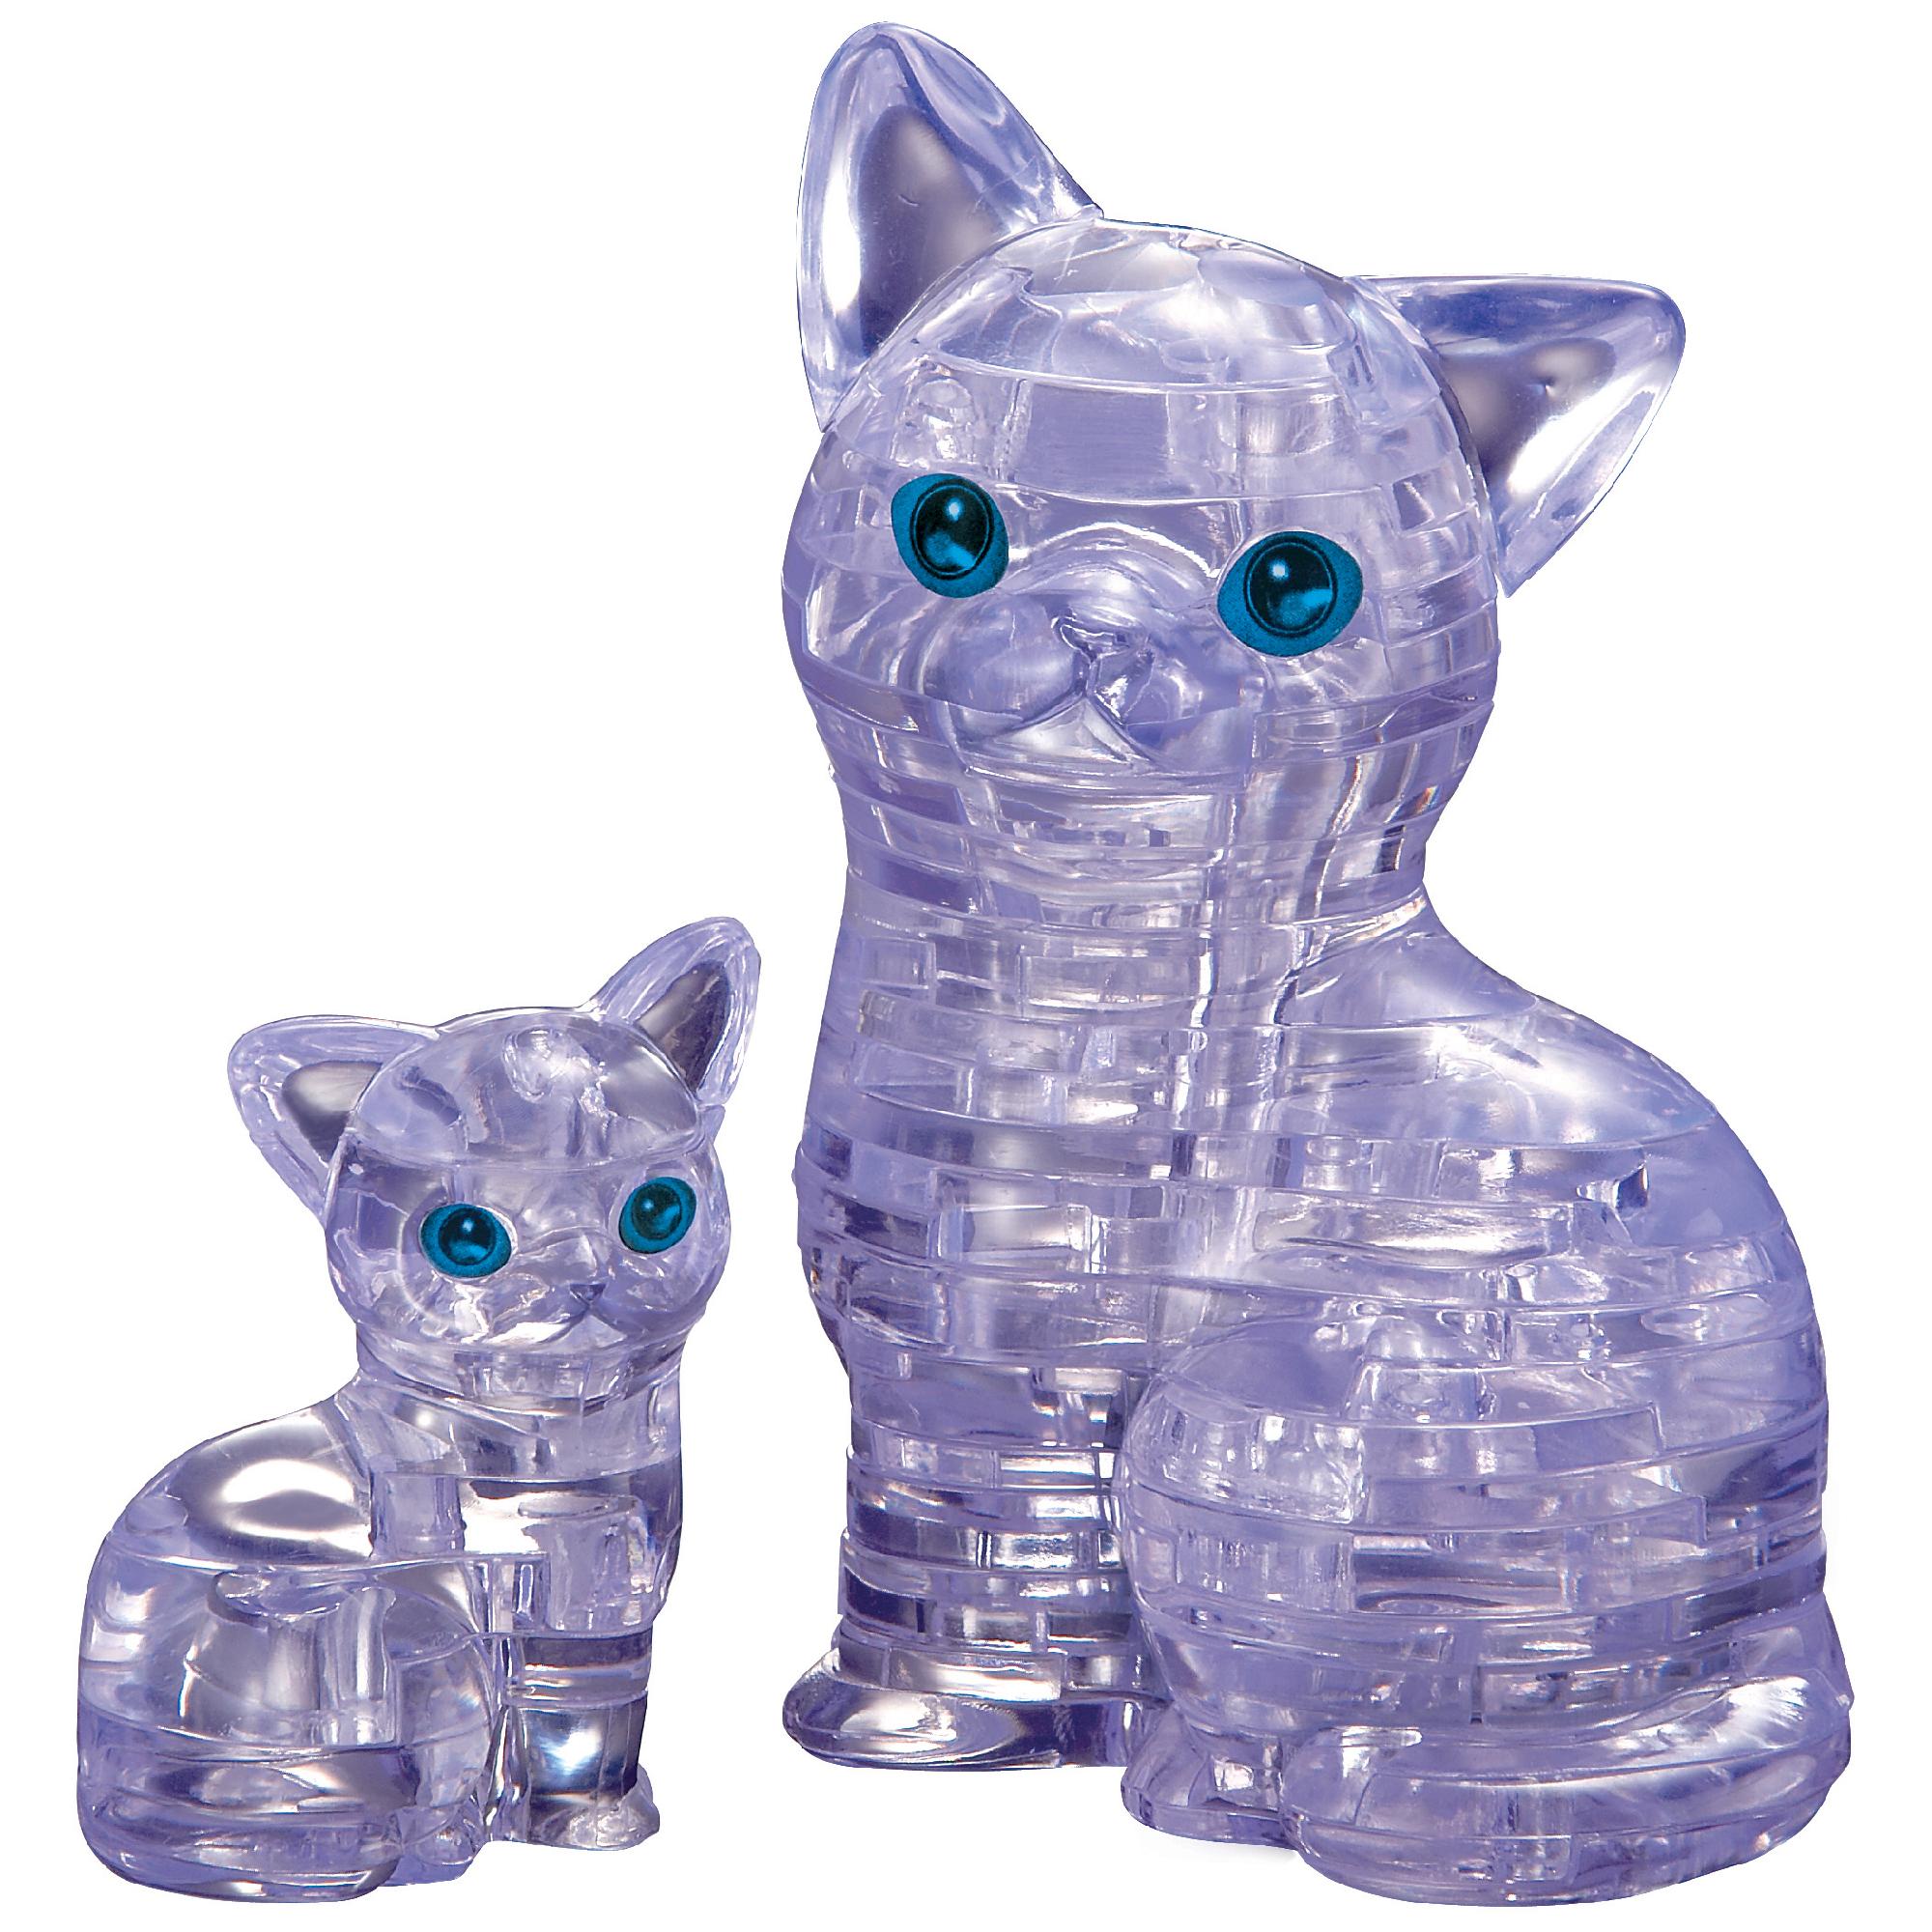 Bepuzzled 3D Crystal Puzzle - Cat with Kitten: 49 Pcs